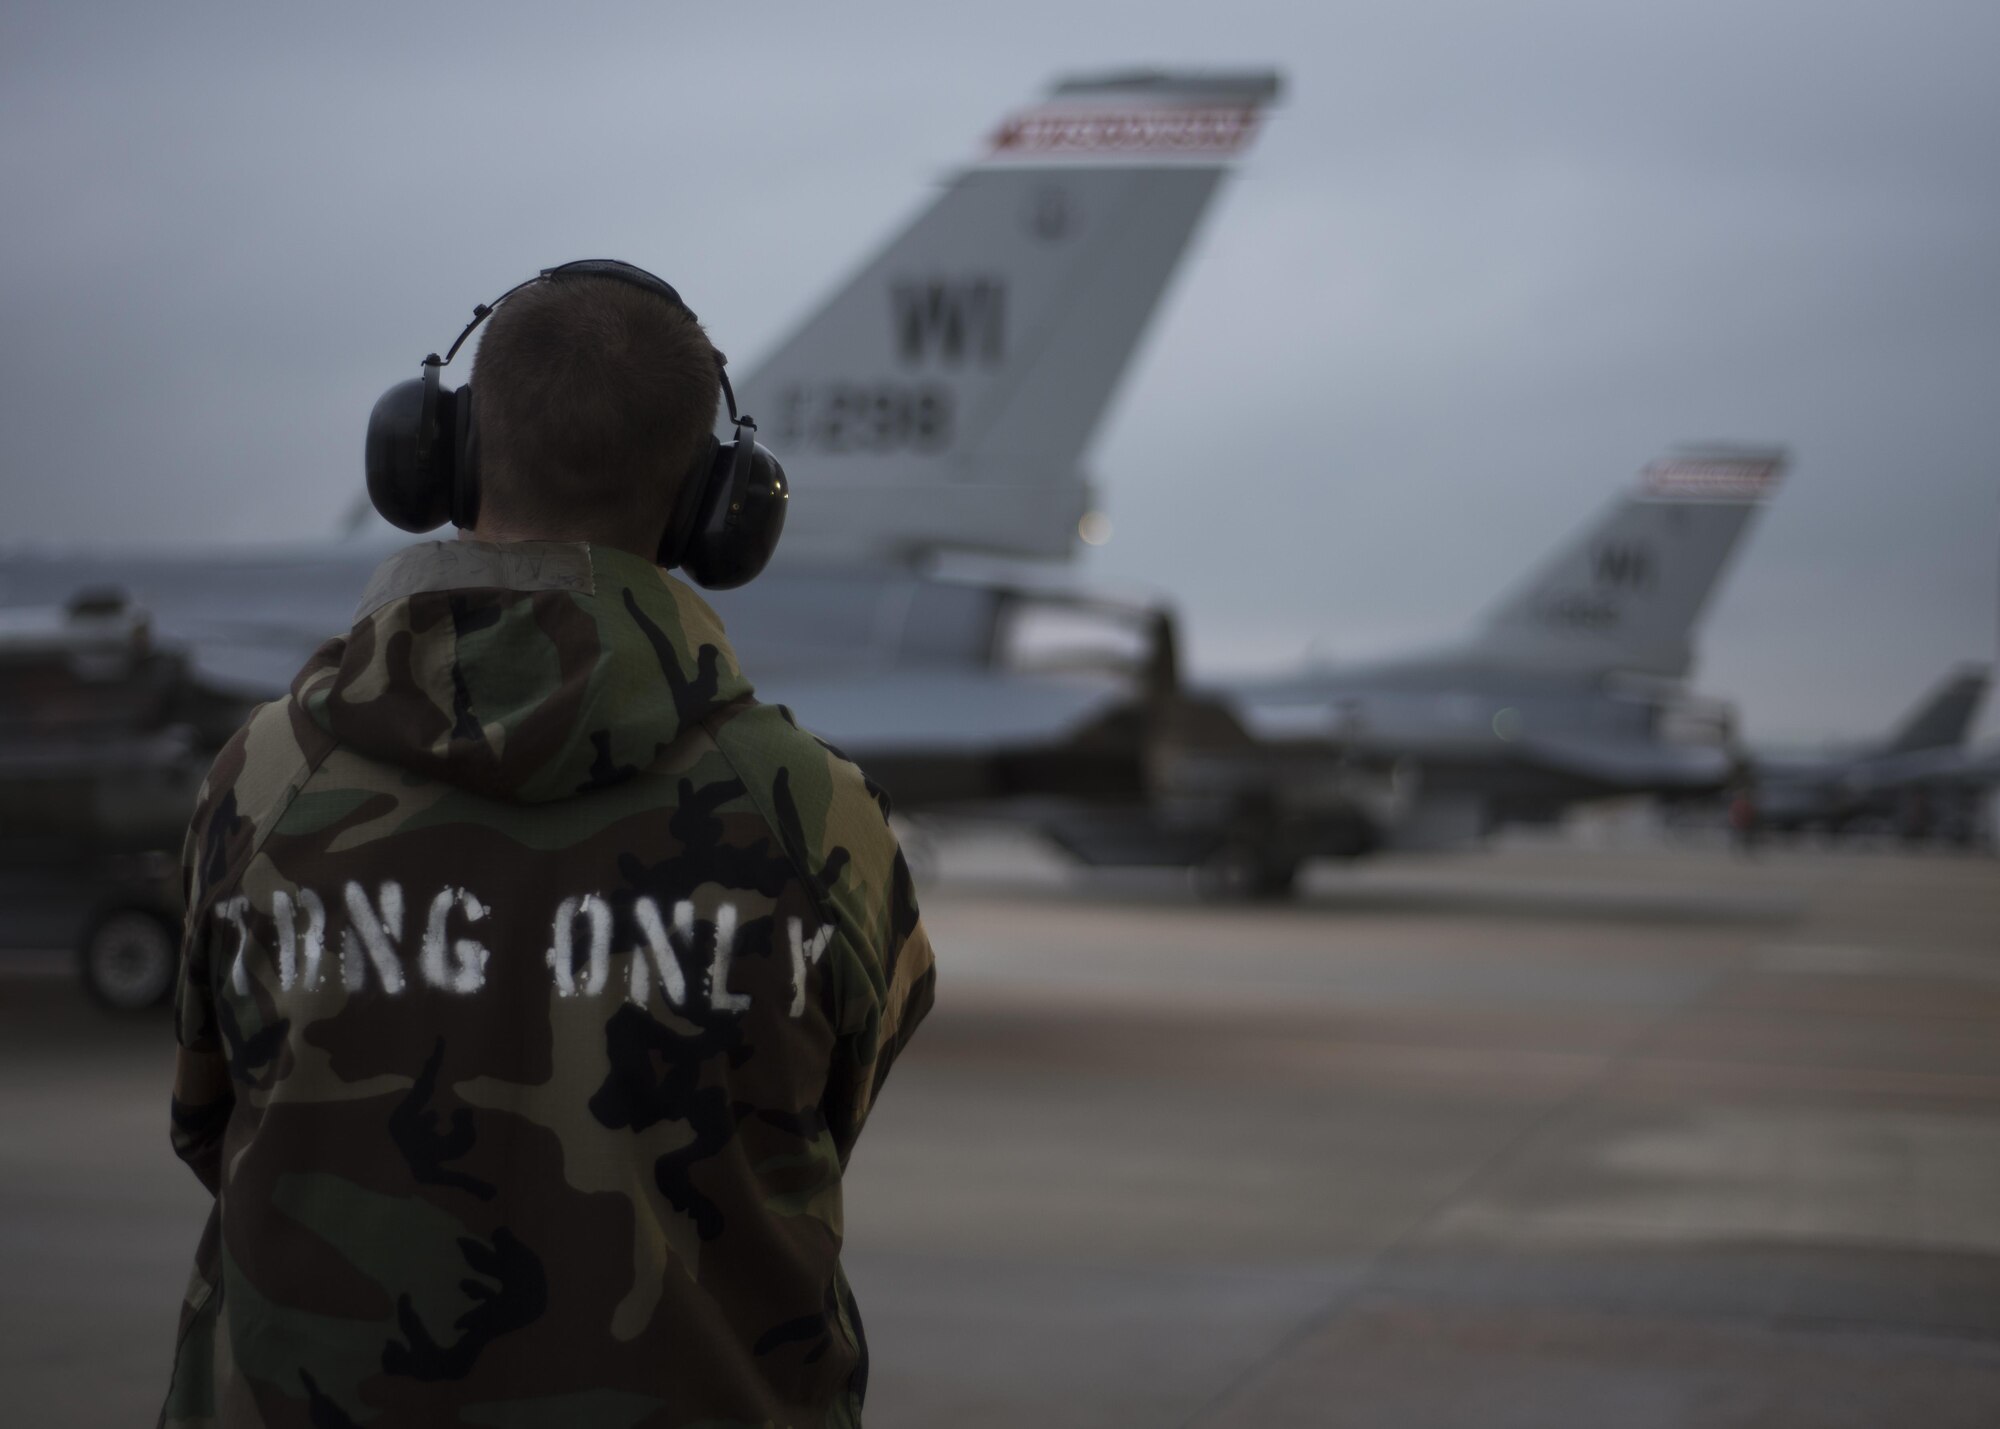 U.S. Air Force Staff Sgt. Andrew Ausel, 115th Aircraft Maintenance Squadron weapons load crew member, assigned to the Wisconsin Air National Guard, watches as four F-16 Fighting Falcons prepare to taxi down the runway at Kunsan Air Base, Republic of Korea, Aug. 22, 2017. The 115th Fighter Wing participated in a regularly-scheduled operational readiness exercise, Beverly Pack 17-3, as part of a Theater Security Package deployment to Kunsan. Pacific Air Forces TSPs signify a continued commitment to regional stability and security, while allowing units to train in the Pacific theater. (U.S. Air Force photo by Staff Sgt. Victoria H. Taylor/Released)